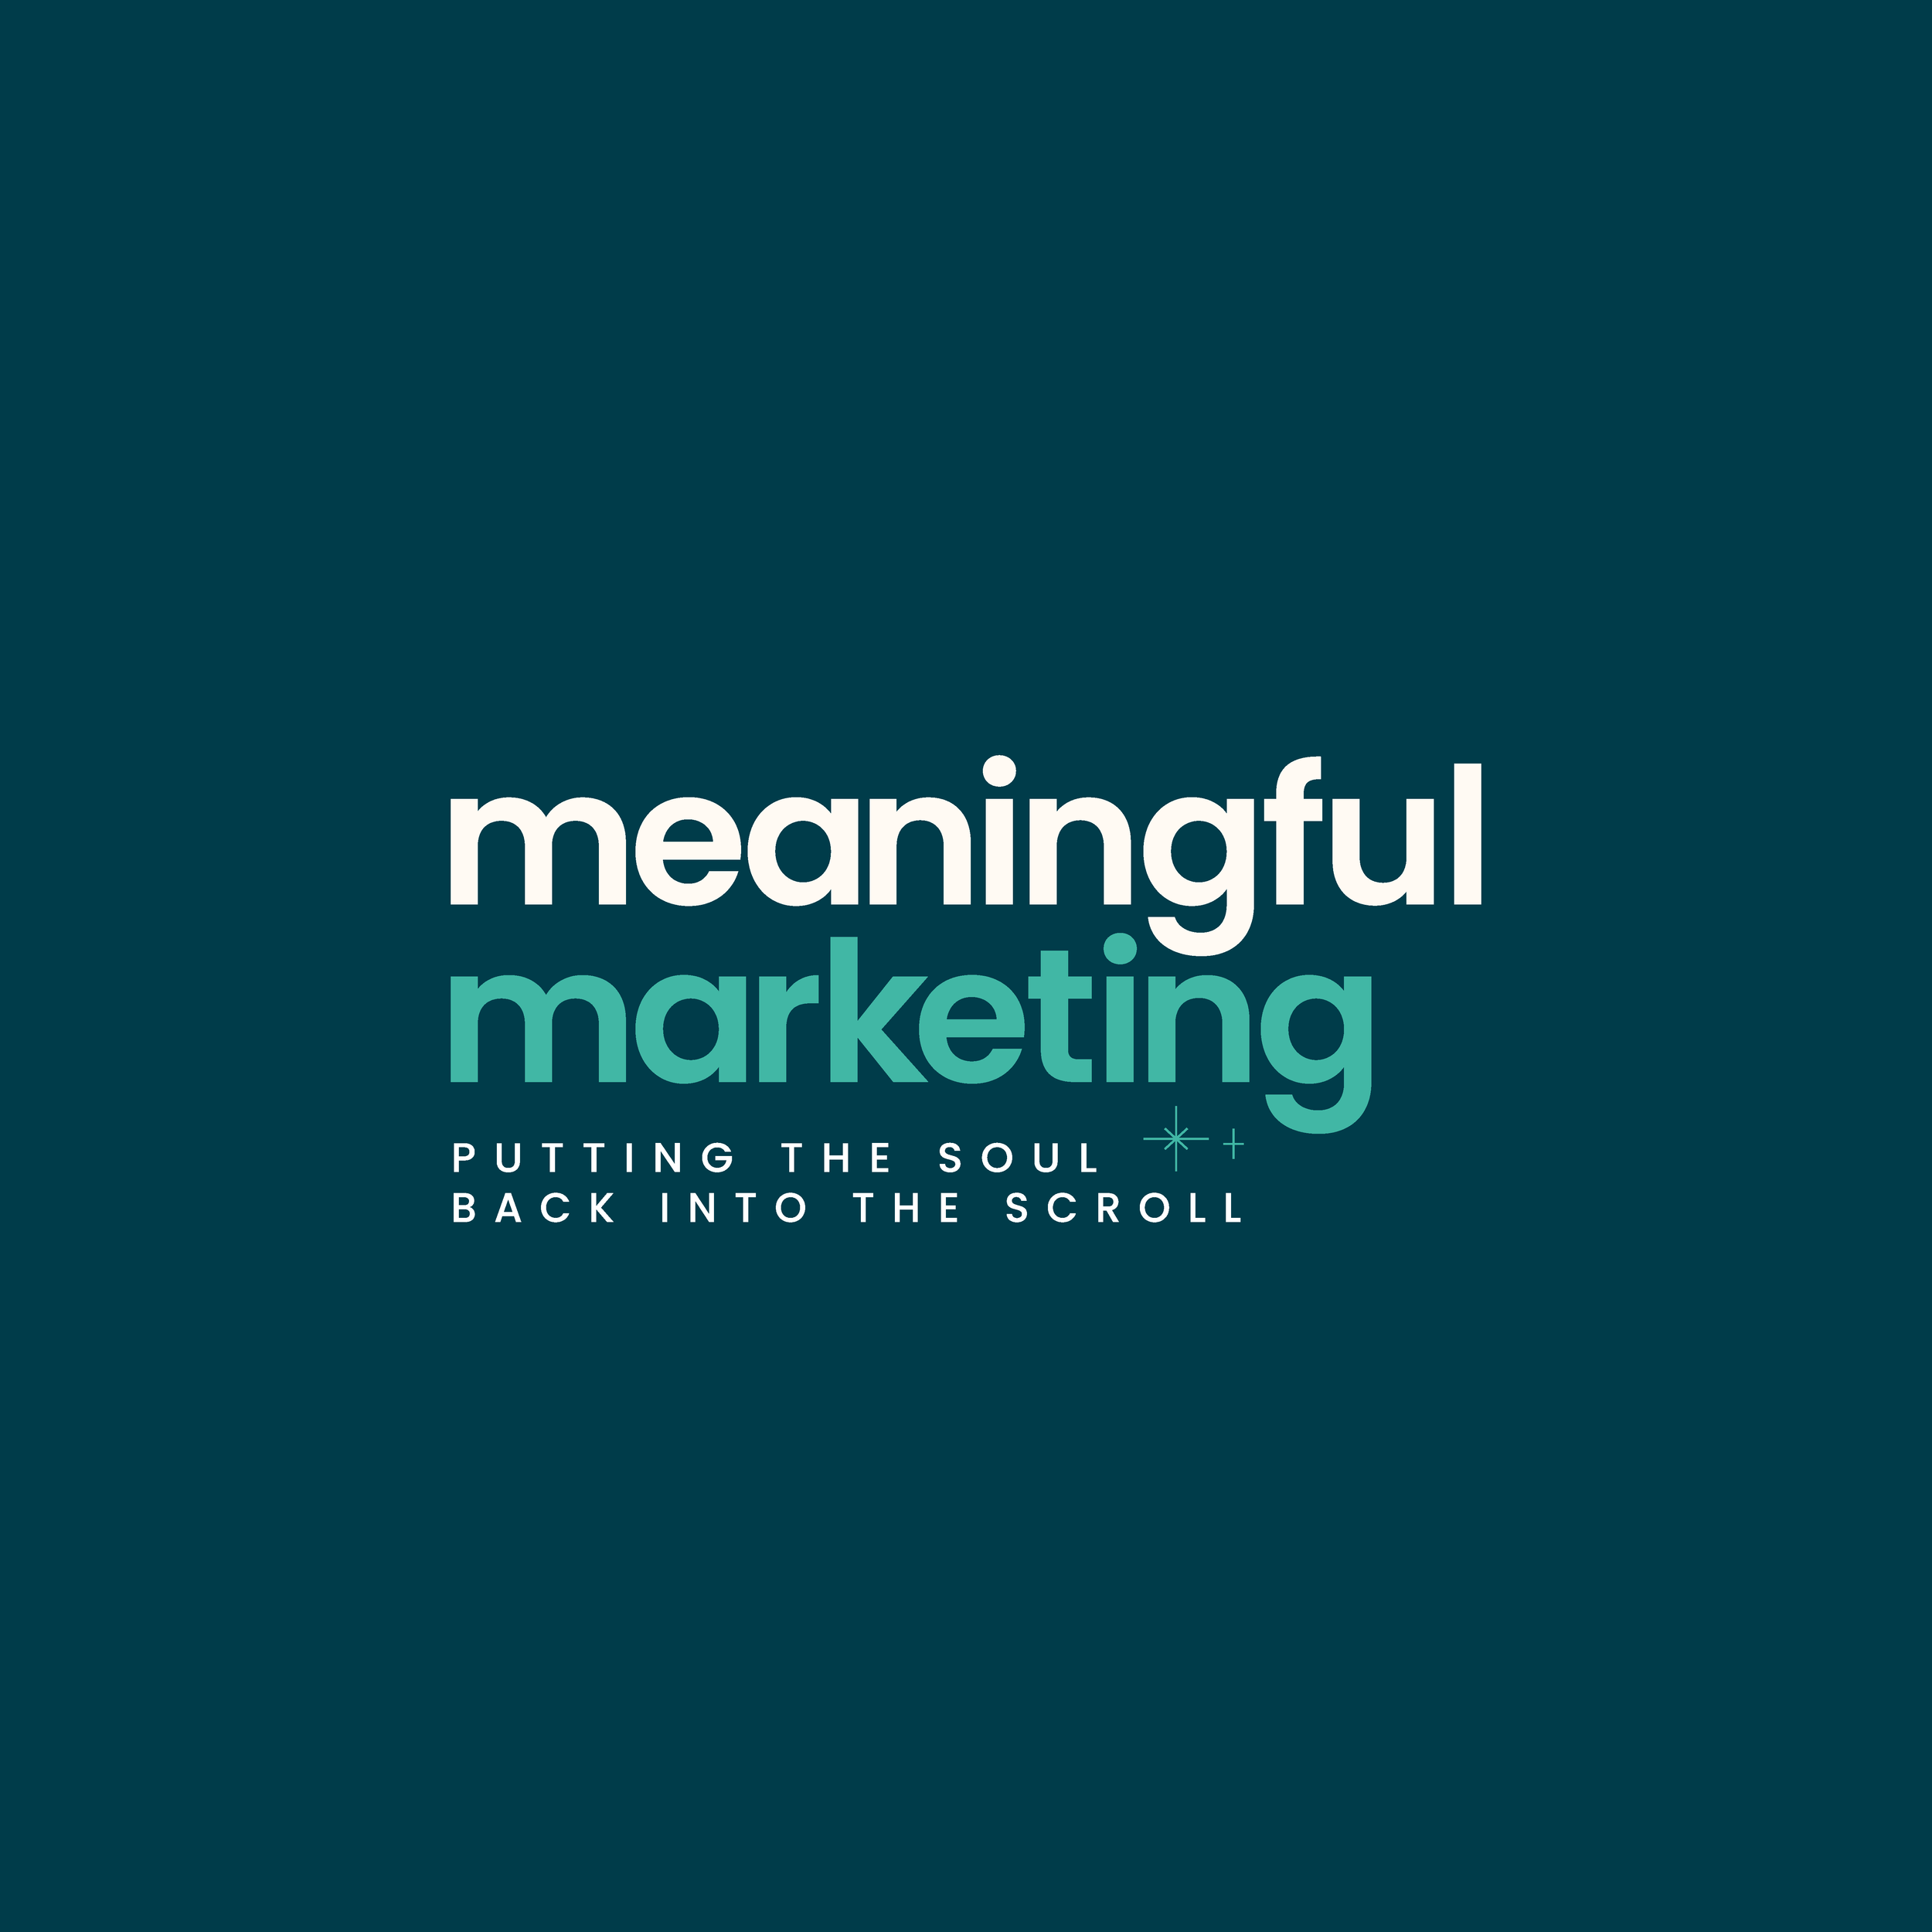 MeaningfulMarketing_Social Media Imagery_8.png